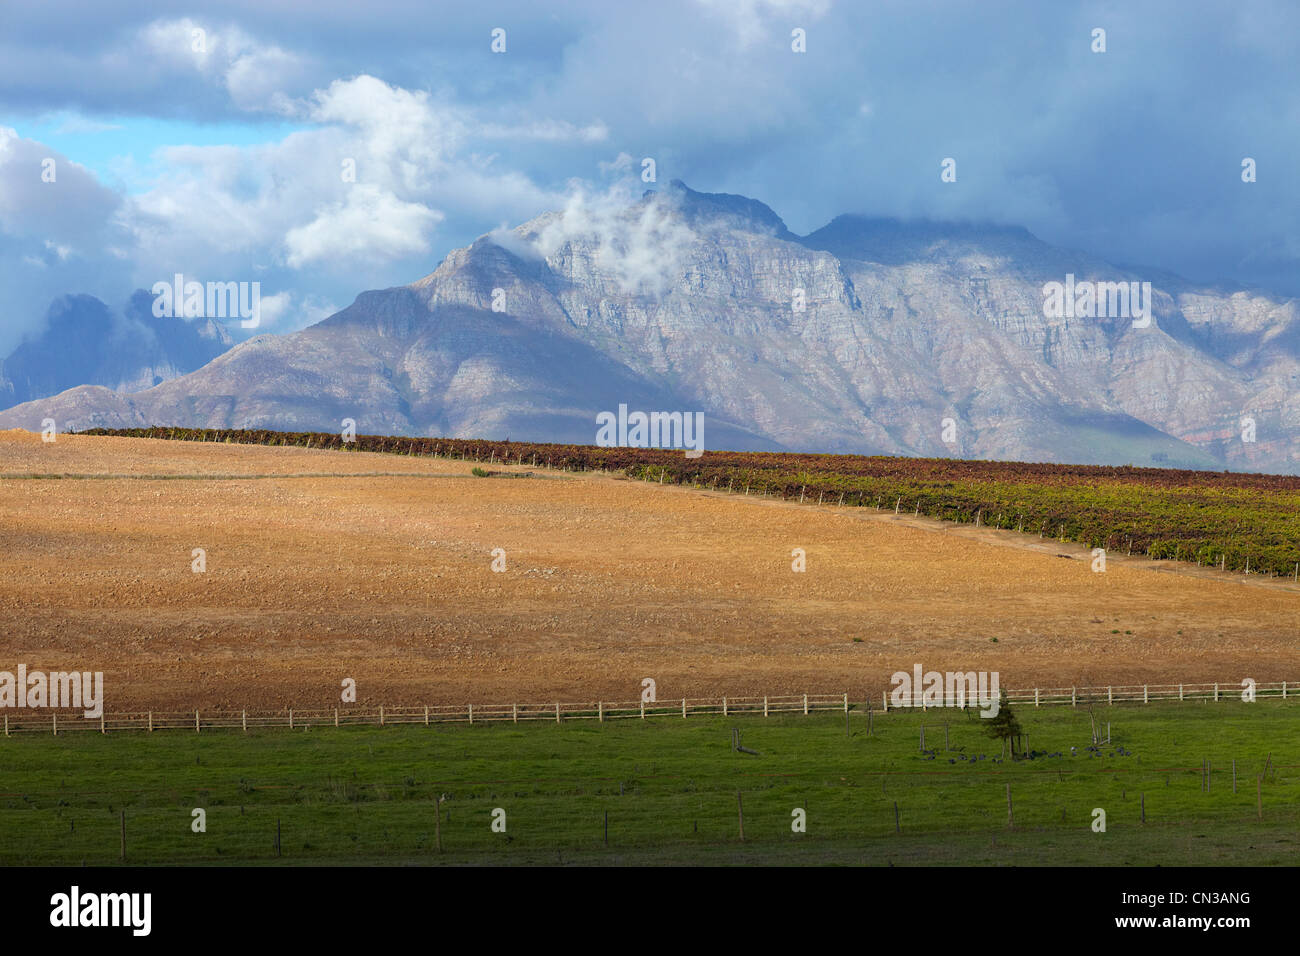 Mountain scenery and vineyard, Stellenbosch, South Africa Stock Photo